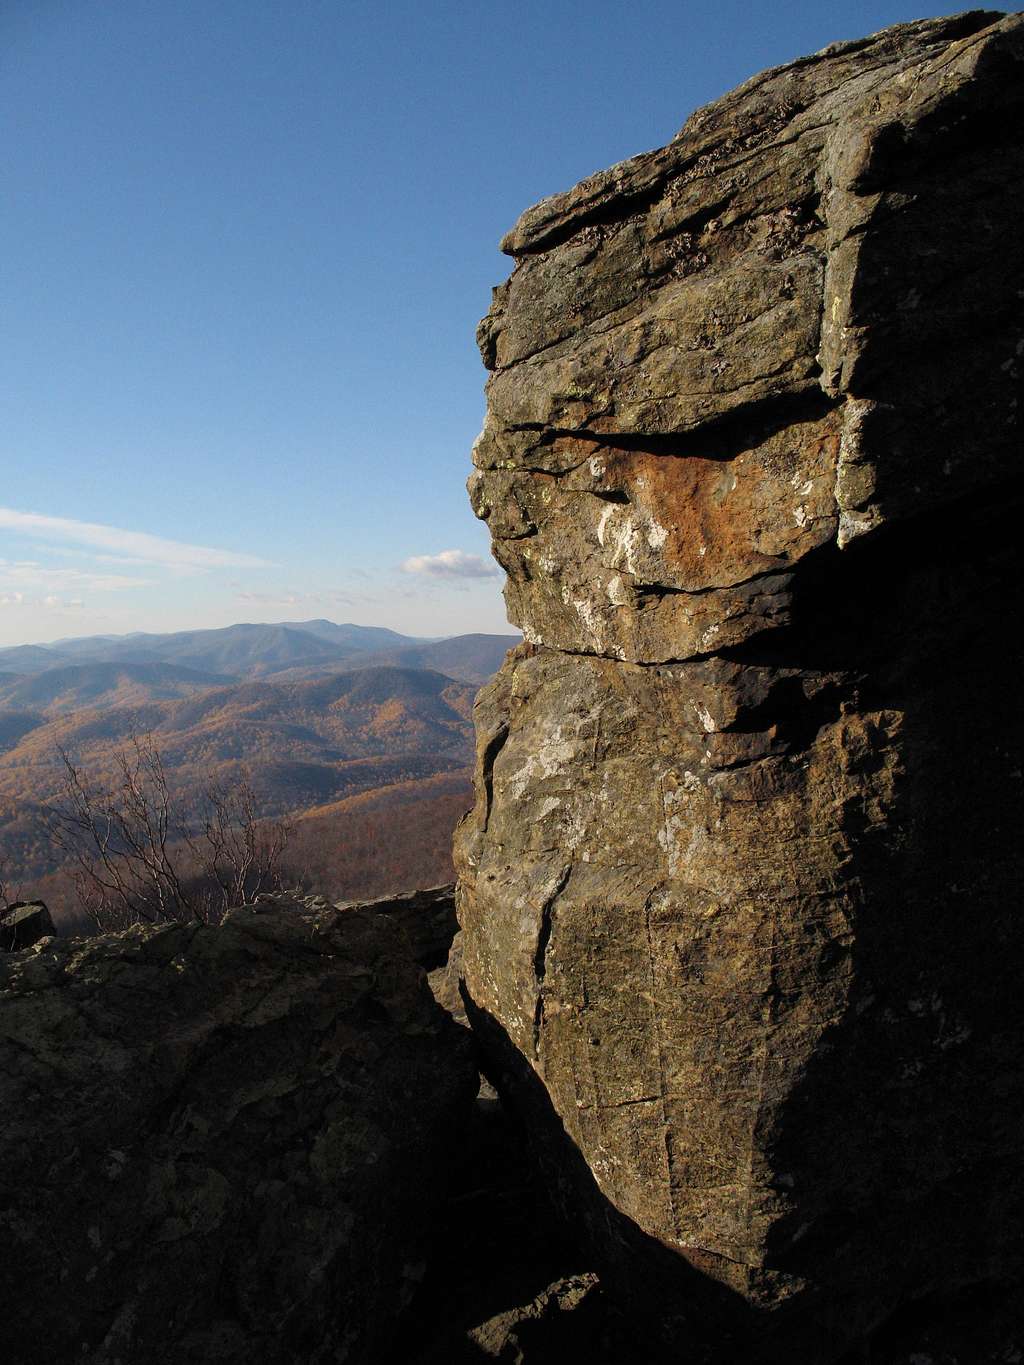 North Marshall Crags